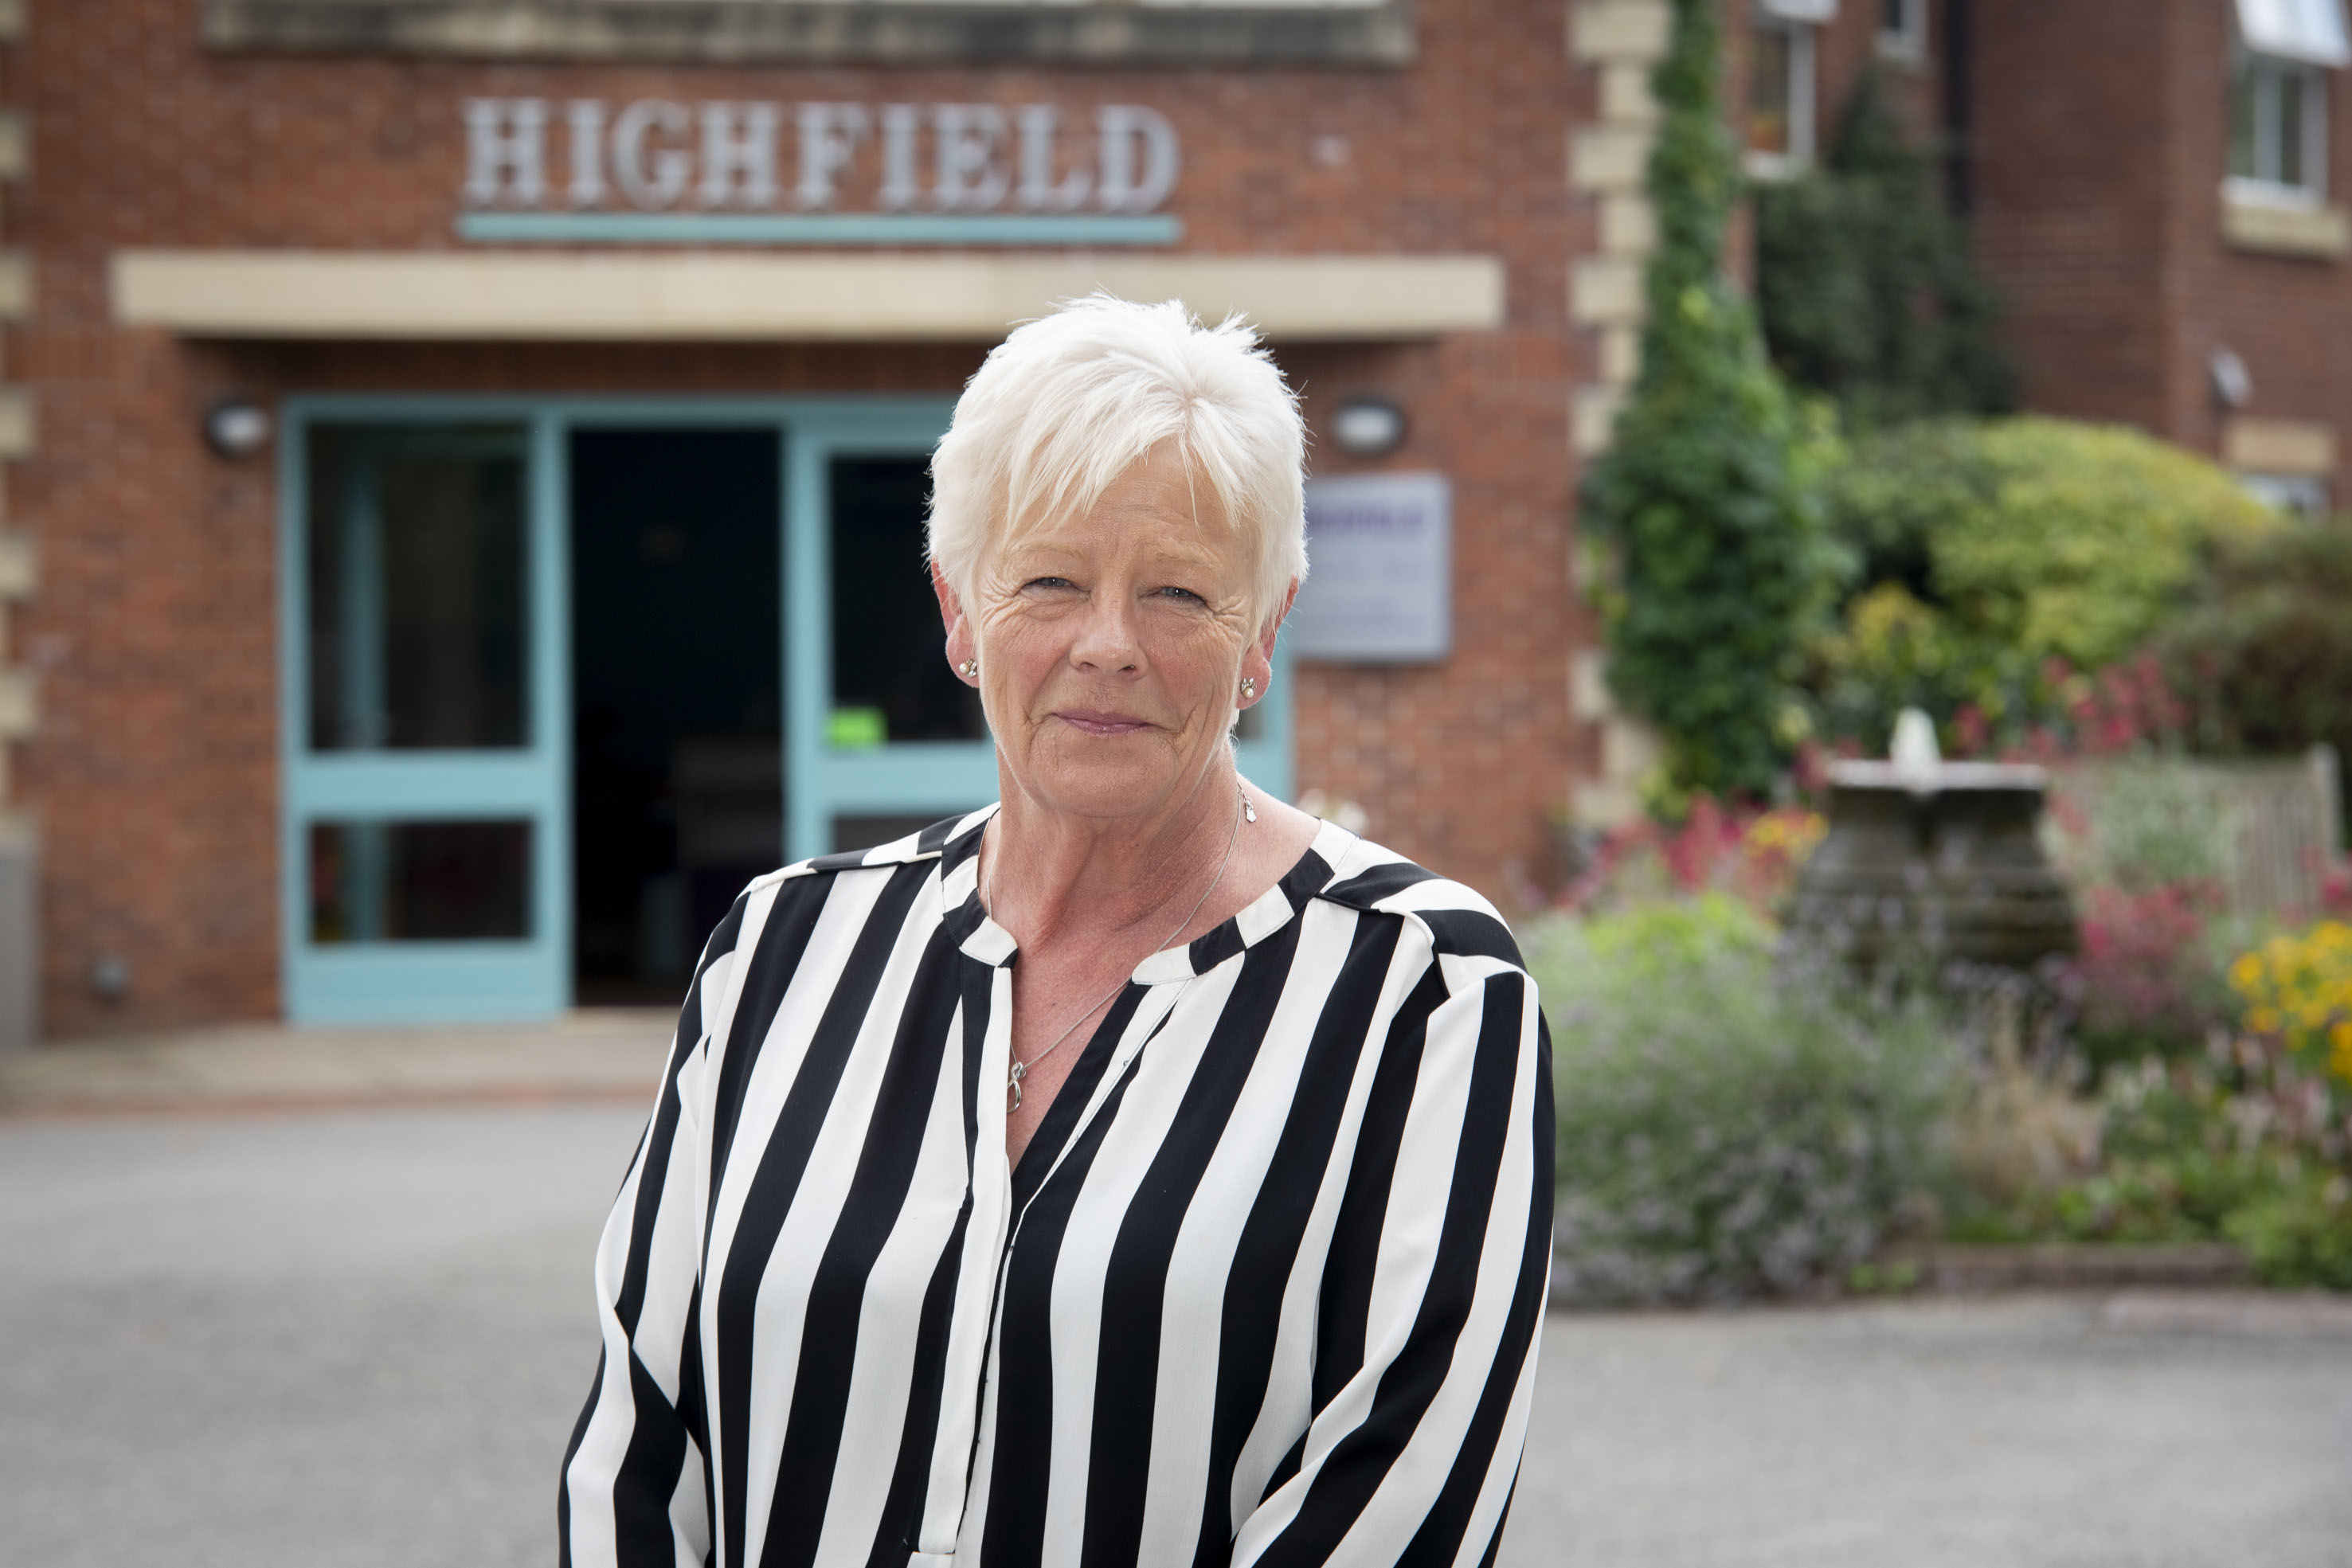 Kind-hearted care home boss Gill has the X-factor